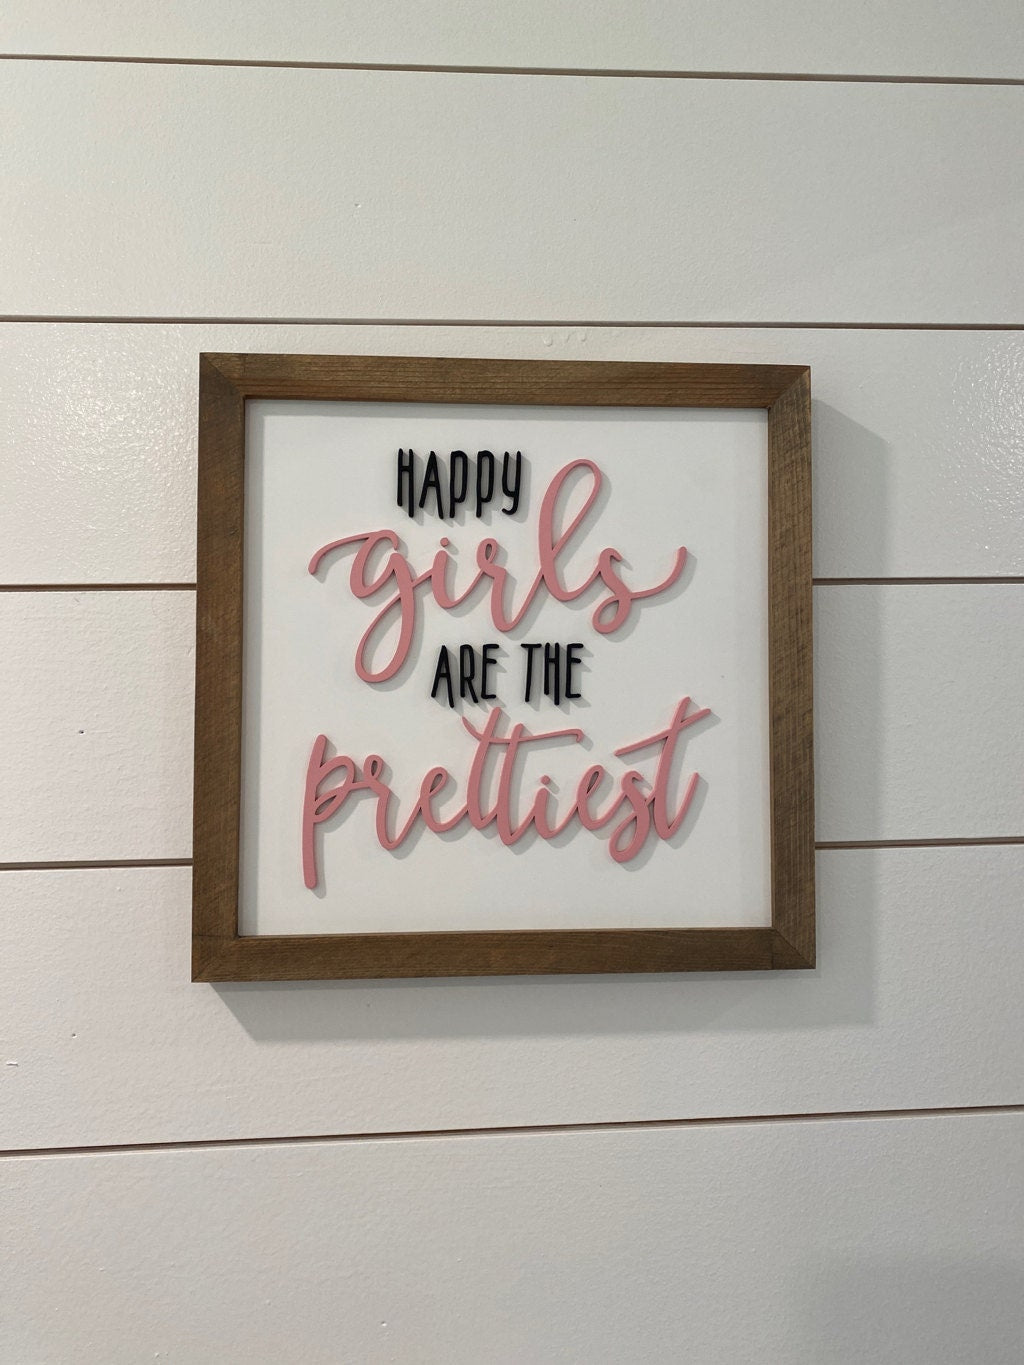 Happy Girls are the Prettiest | 16x16 inch Wood Framed Sign